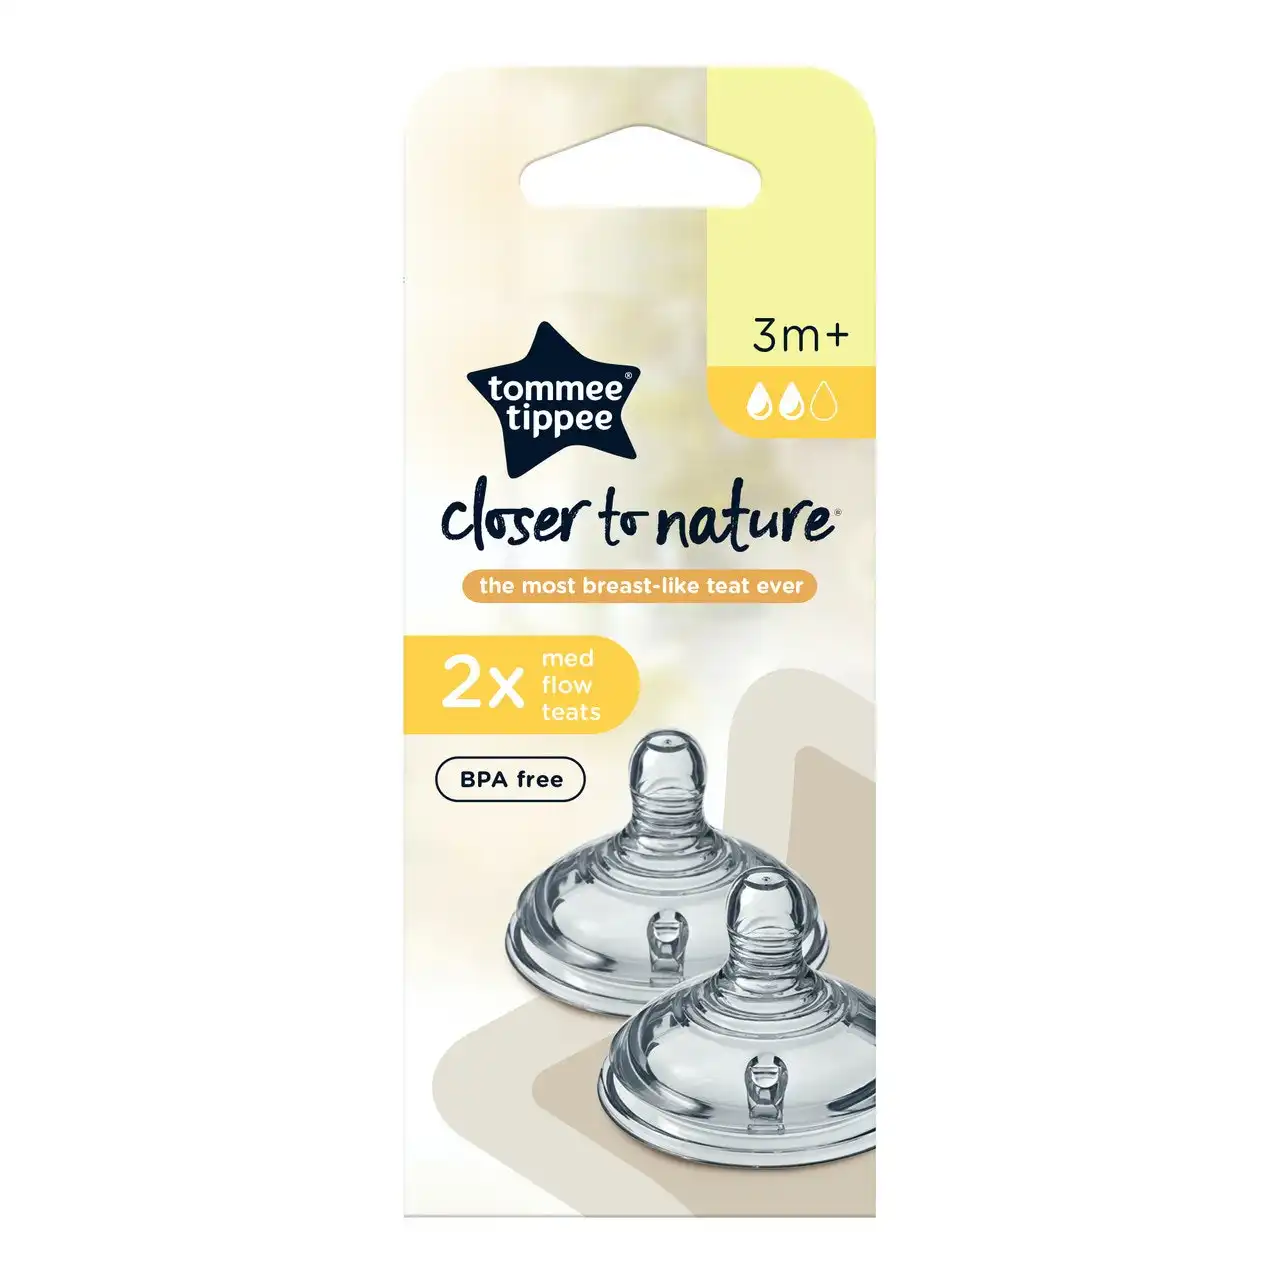 Tommee Tippee Closer to Nature Baby Bottle Teats, Breast-like, Anti-colic Valve, Soft Silicone, Medium Flow, 3m+, 2 pack